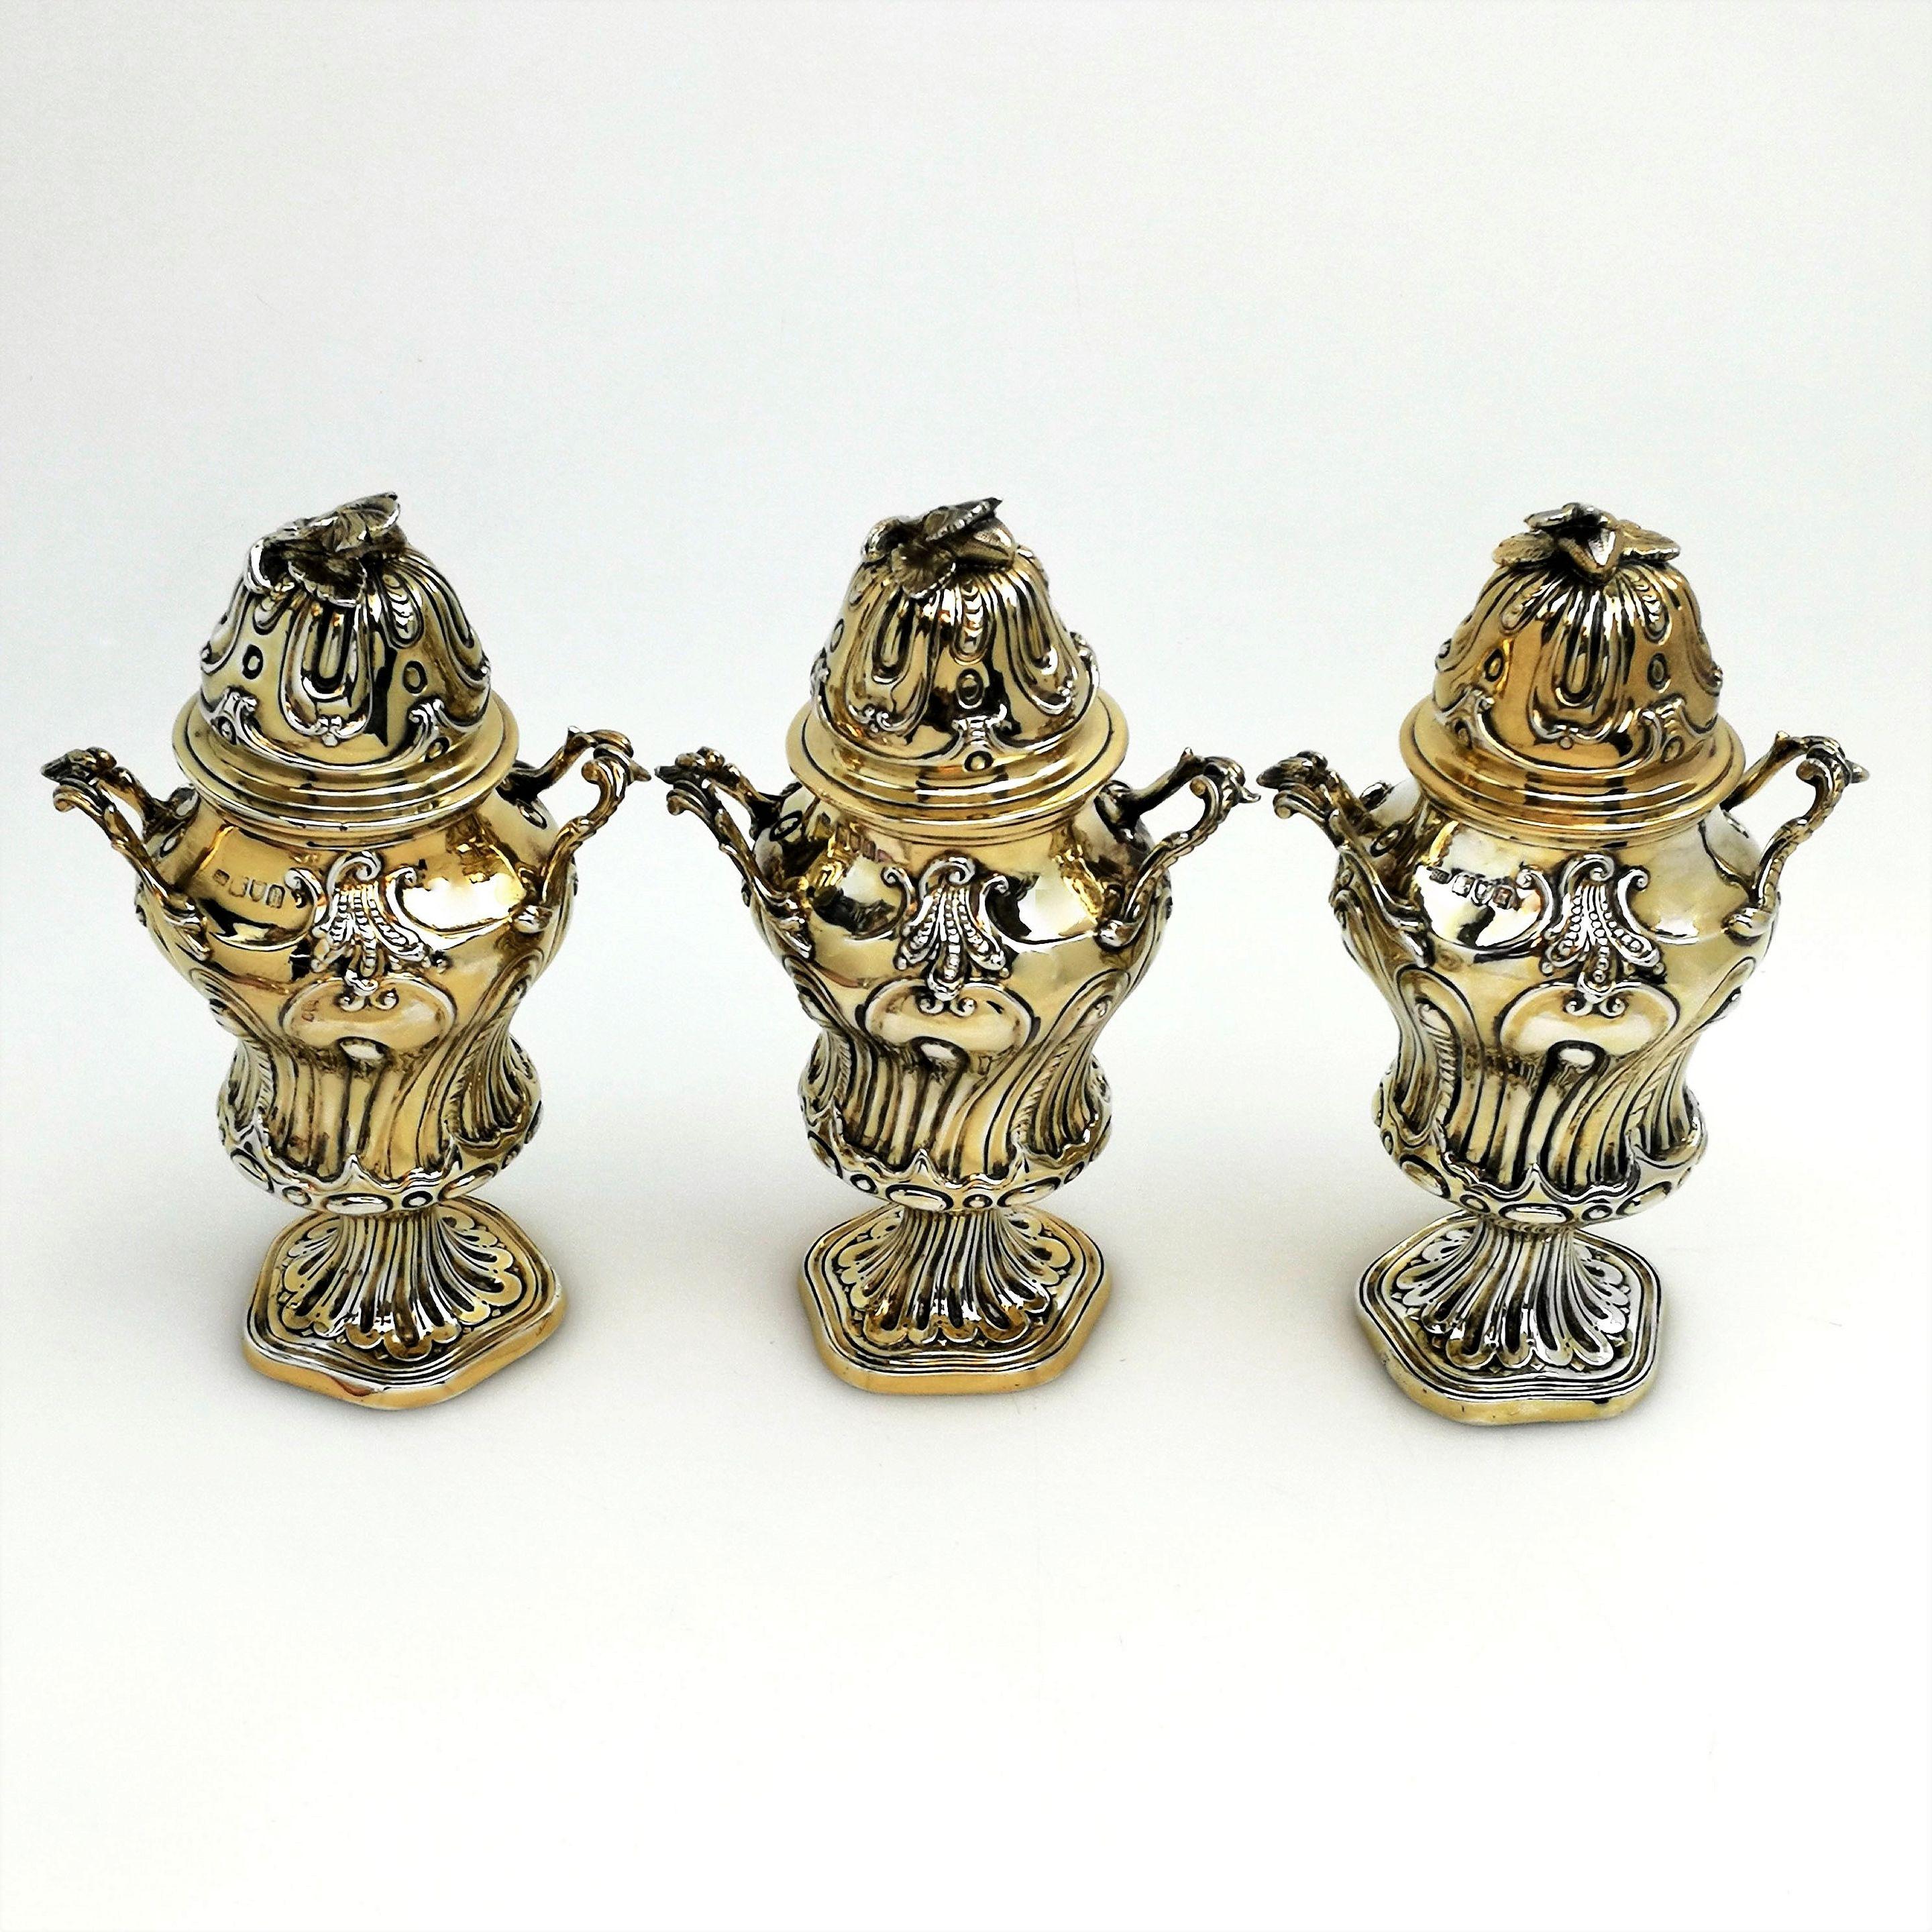 Set of 3 Antique Silver Gilt Tea Caddies 1903-1906 Boxes In Good Condition For Sale In London, GB